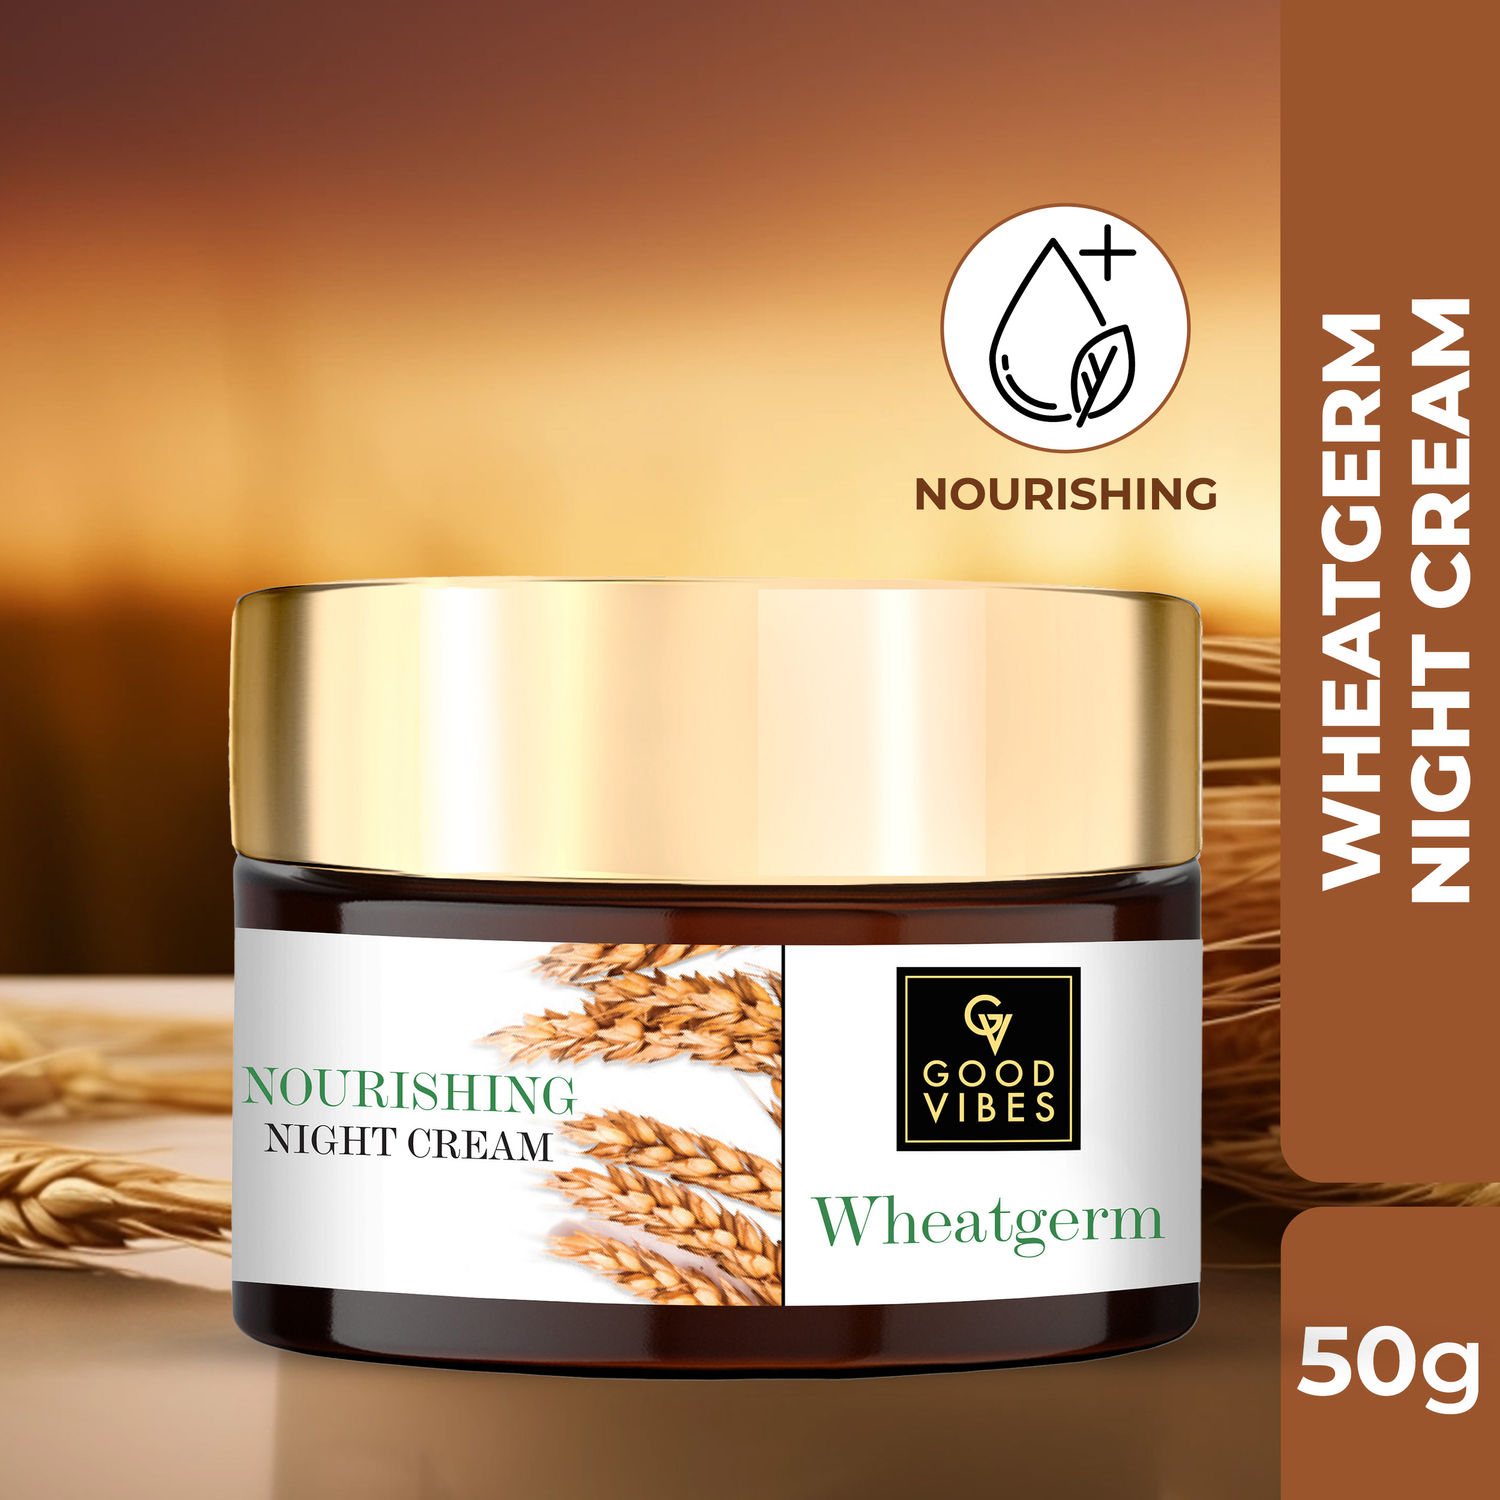 Buy Good Vibes Wheatgerm Nourishing Night Cream | Anti-Inflammatory, Heals Scars | With Almond Oil | No Parabens, No Sulphates, No Mineral Oil (50 g) - Purplle